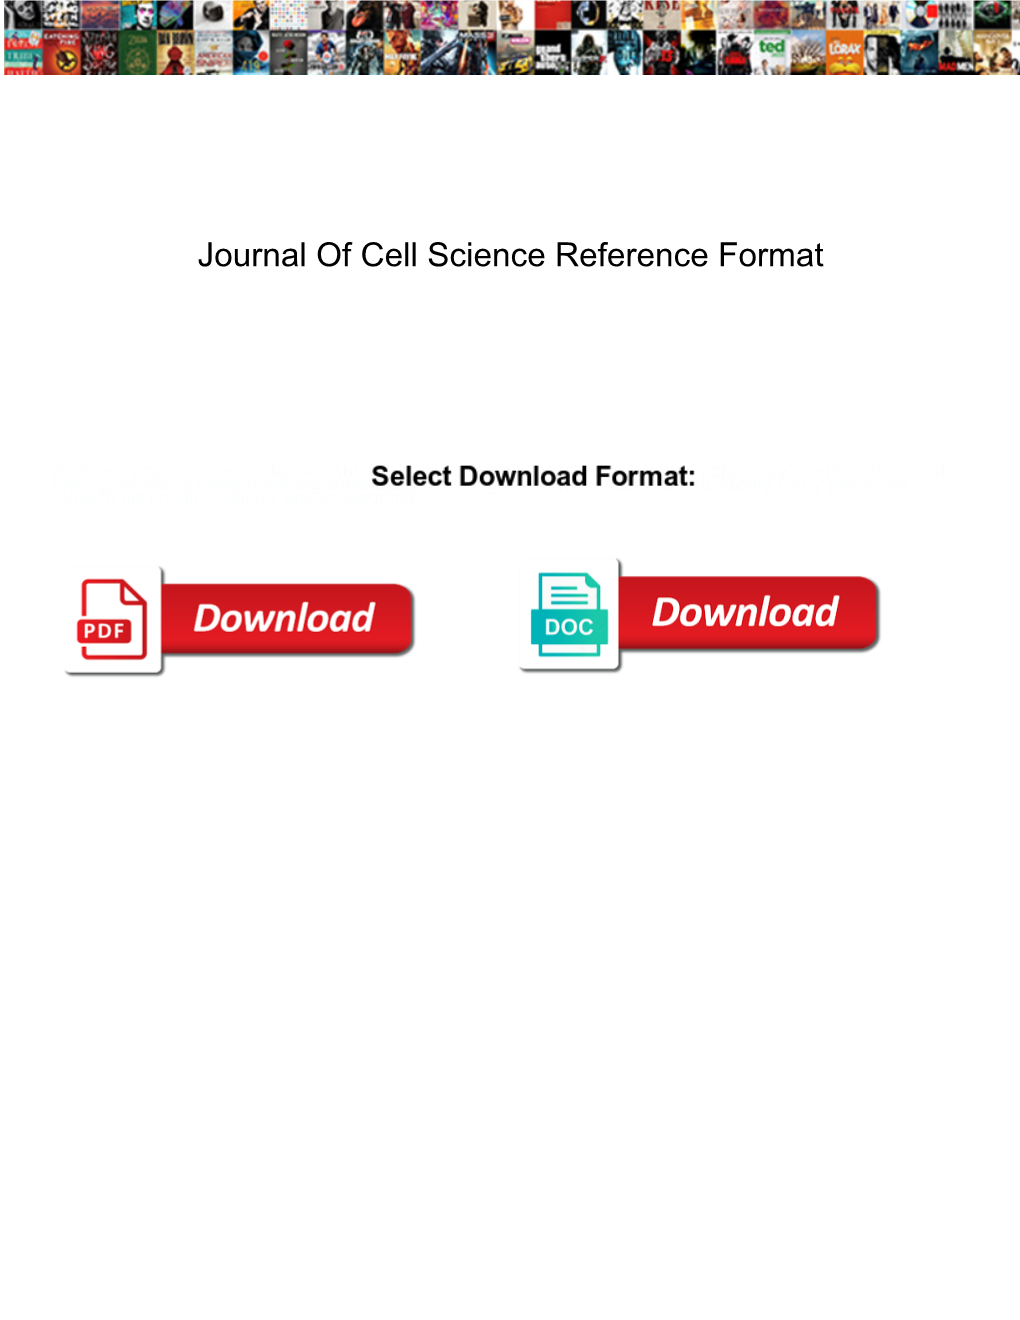 Journal of Cell Science Reference Format